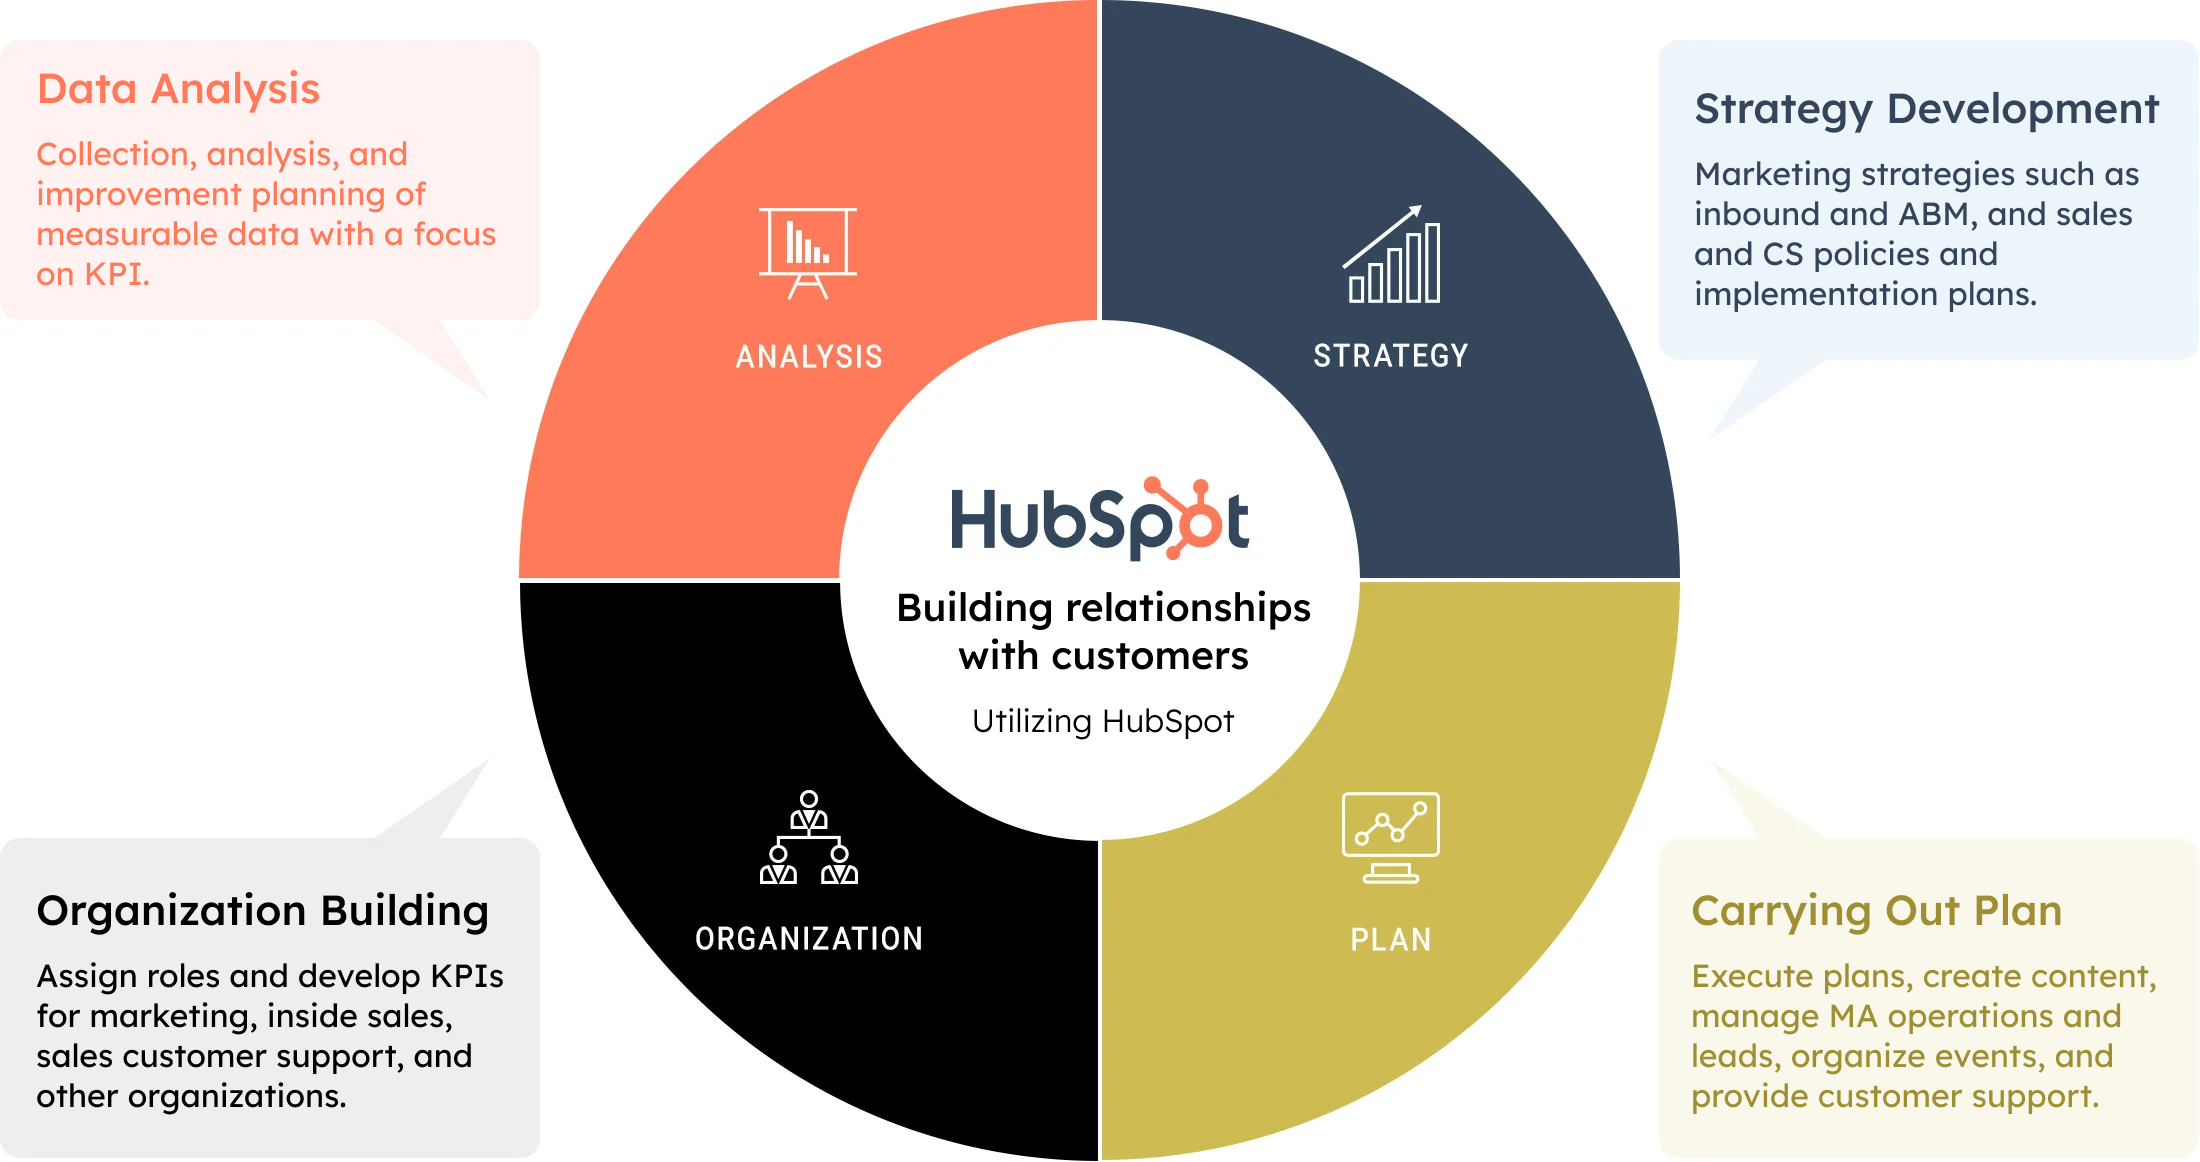 Areas of support for introduction and utilization of HubSpot by 100 Inc.